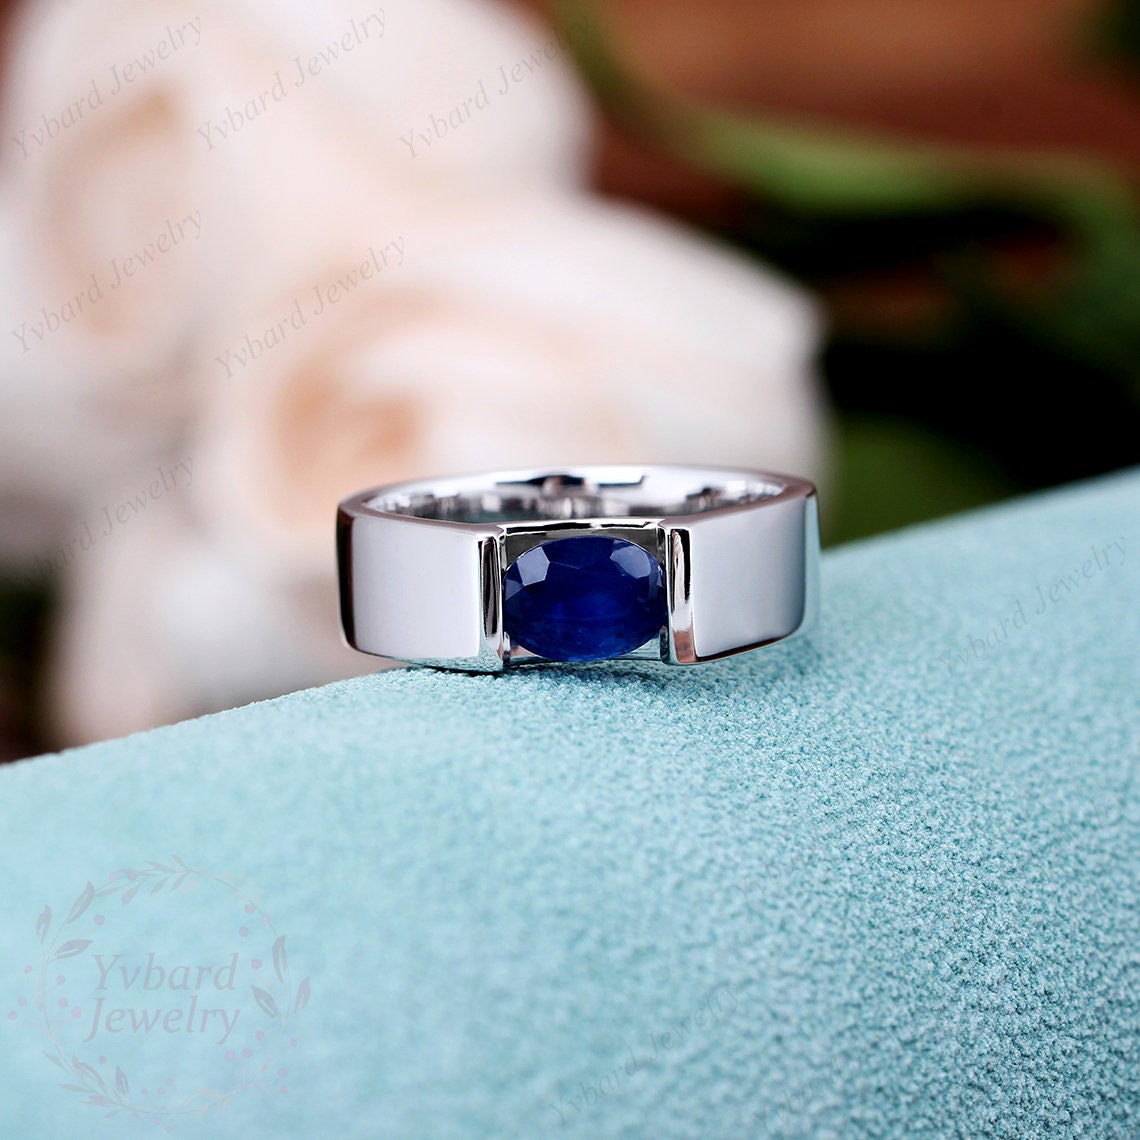 Buy Man Sapphire Stone Ring , Blue Sapphire Ring , Ottoman Style Man Ring ,  Embroidered Men's Ring , 925k Sterling Silver Ring , Gift for Him Online in  India - Etsy